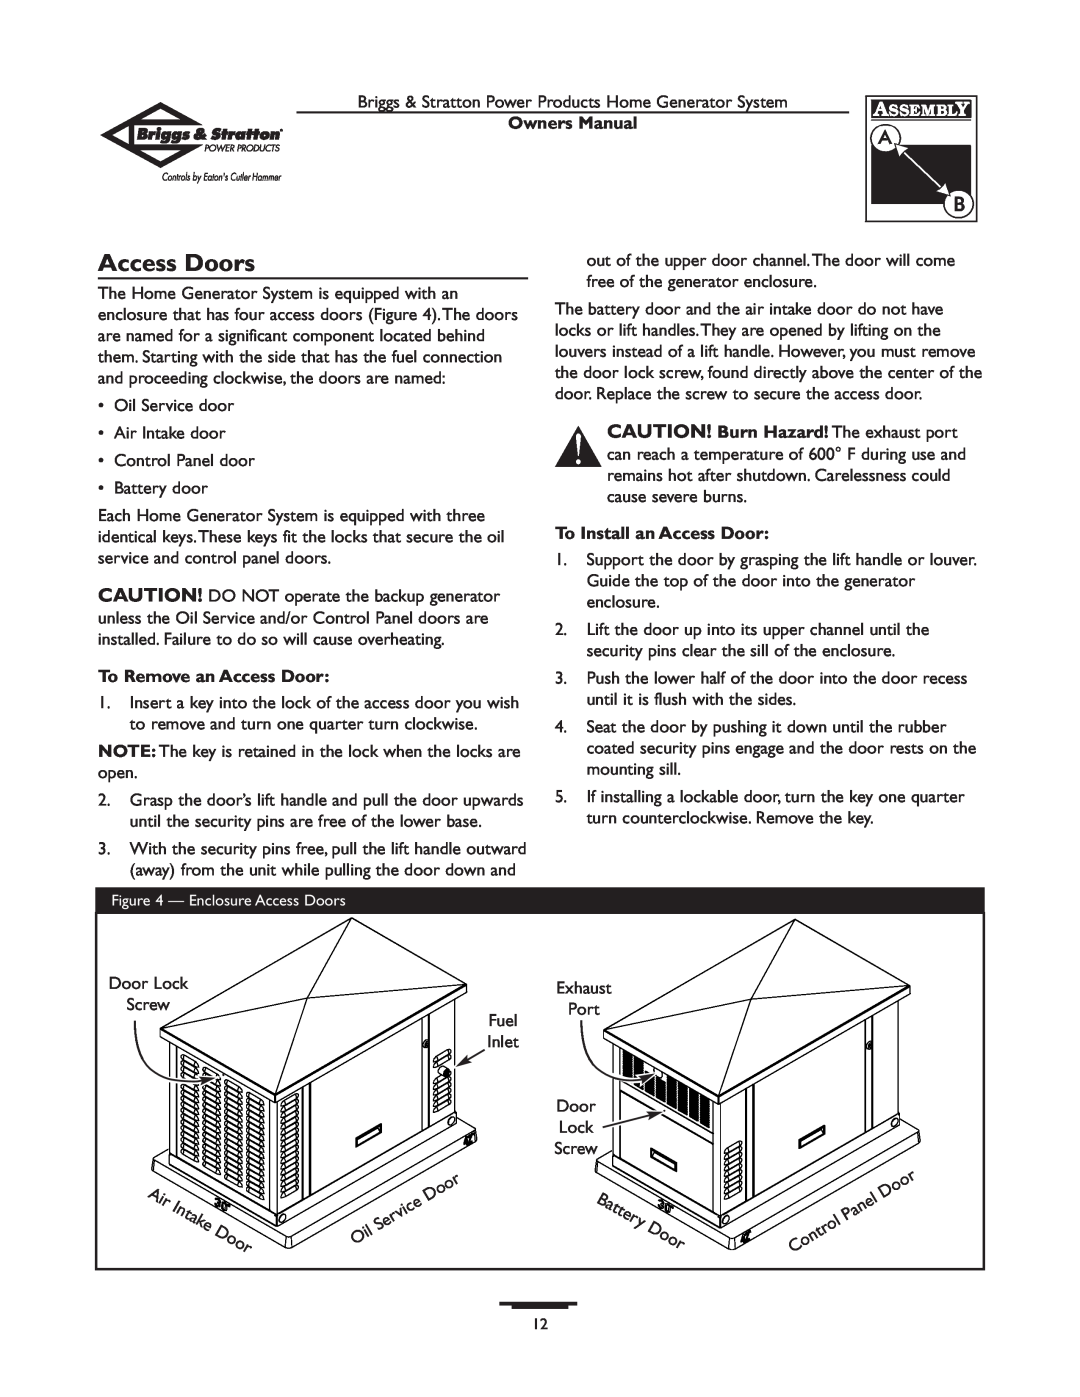 Briggs & Stratton 1679-0 owner manual Access Doors, Owners Manual, To Remove an Access Door, To Install an Access Door 